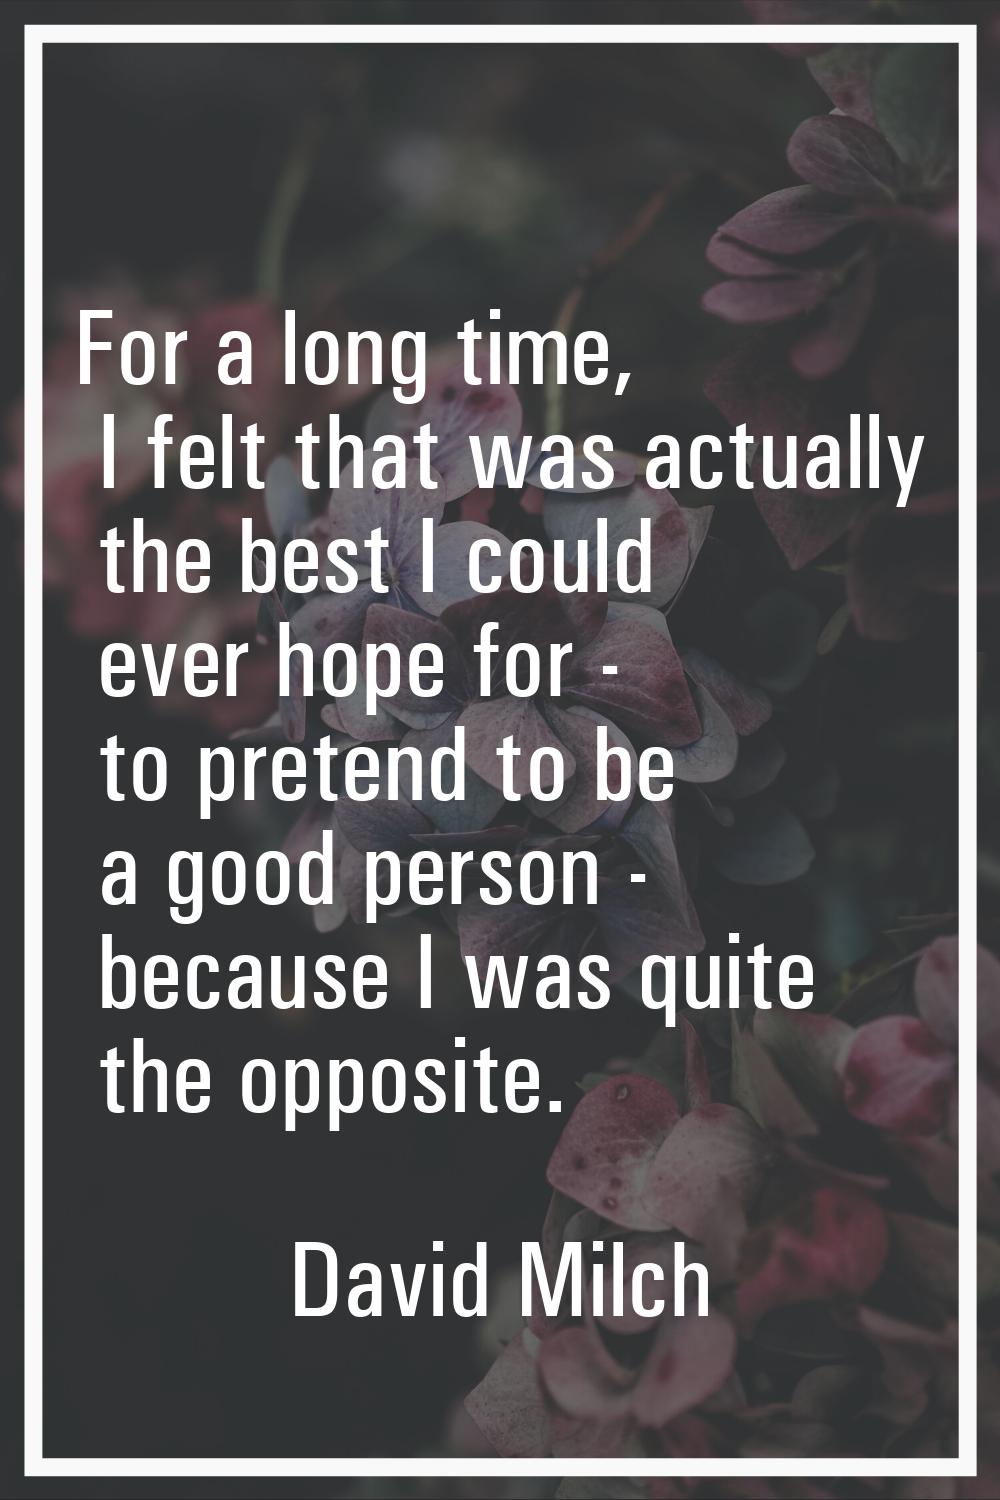 For a long time, I felt that was actually the best I could ever hope for - to pretend to be a good 